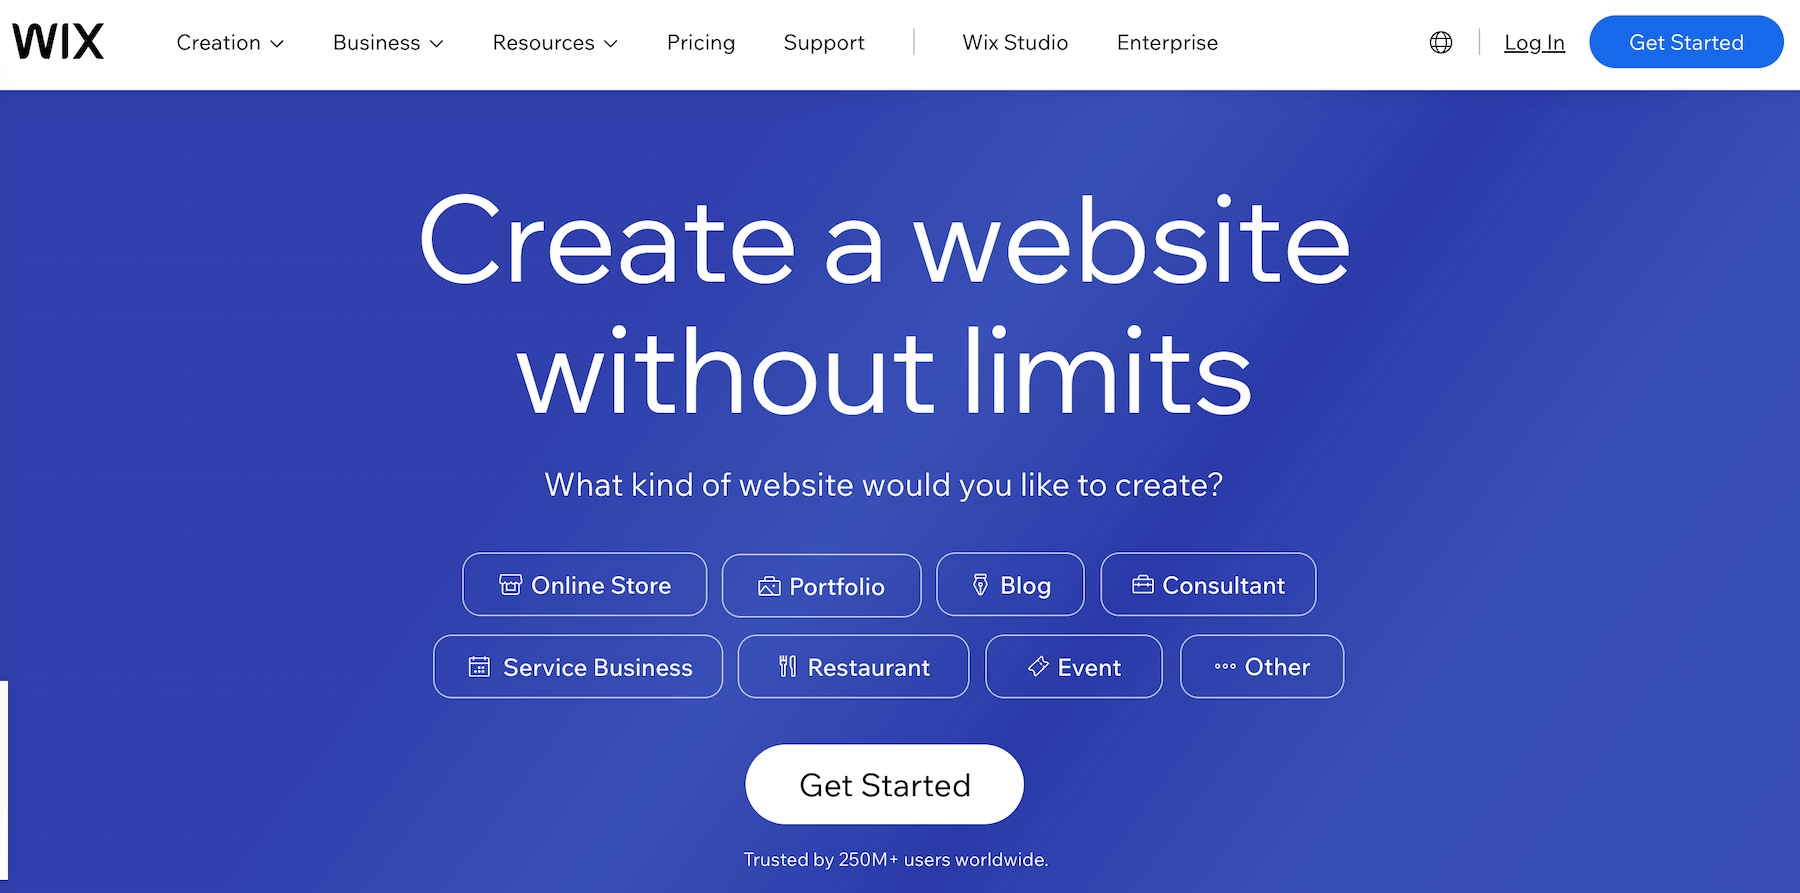 The front page of Wix, a popular option for how to create a website free of cost.